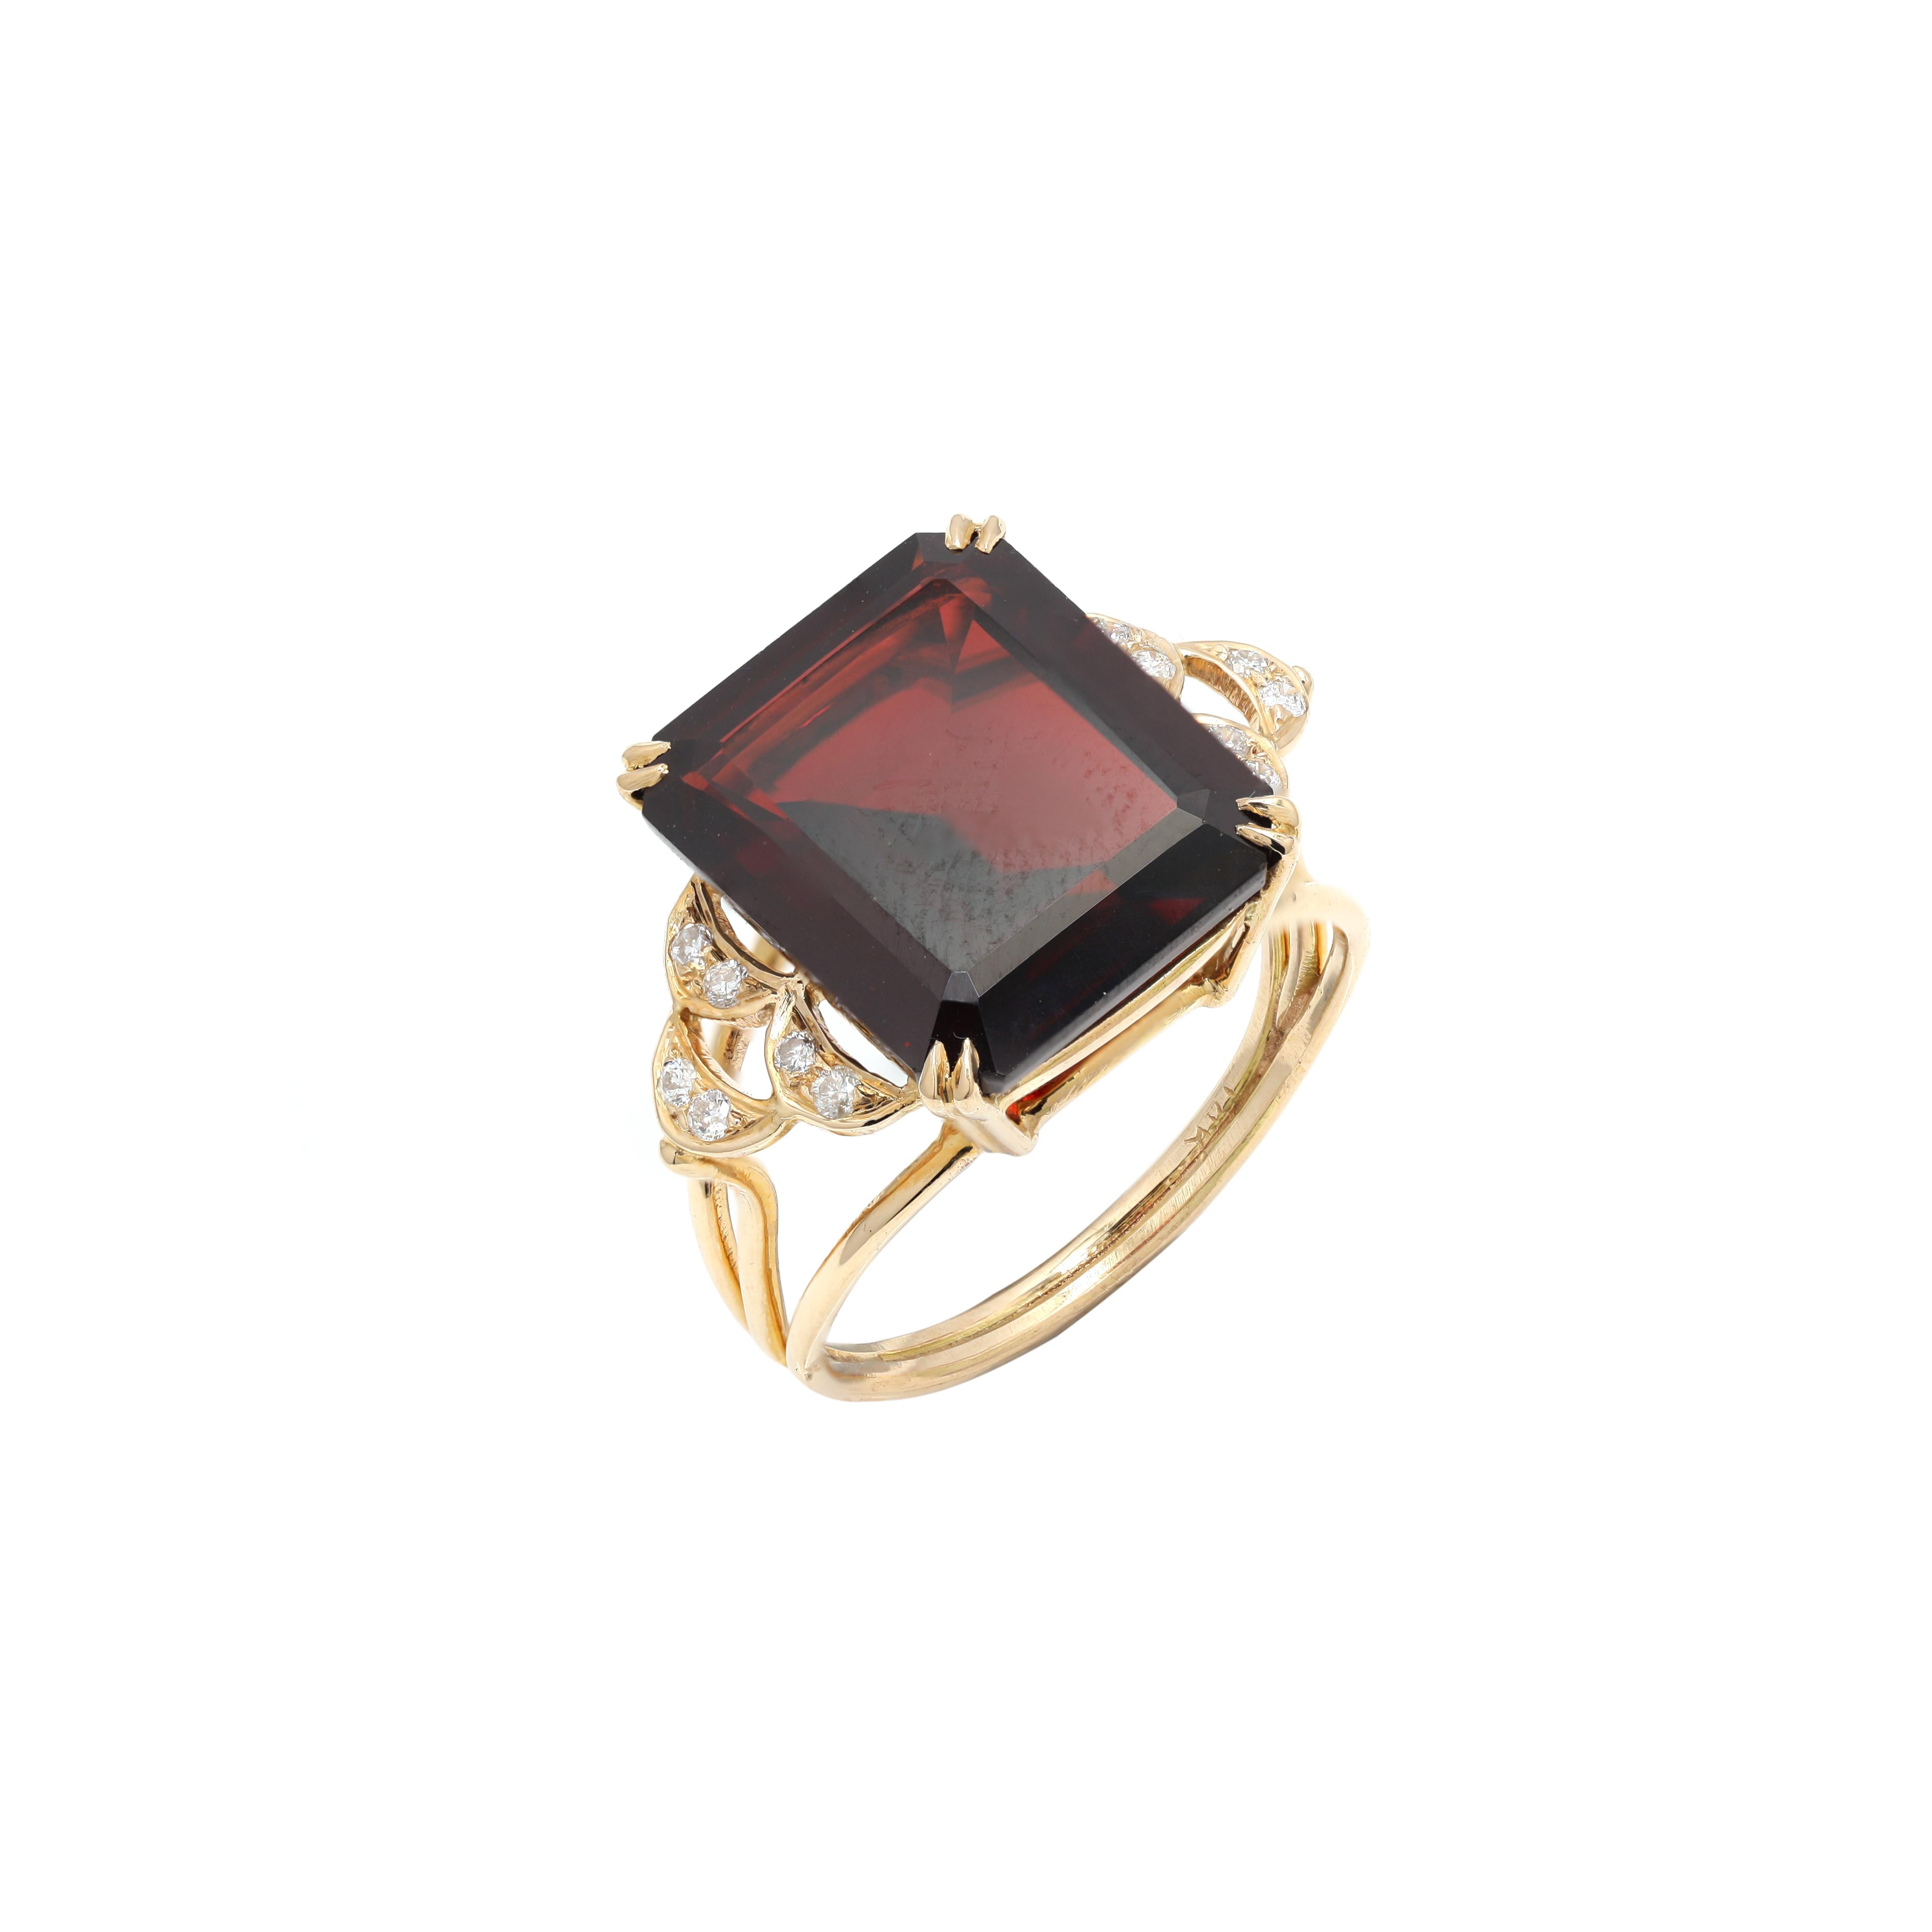 For Sale:  14k Solid Yellow Gold 10.7 Carat Deep Red Garnet Gemstone Ring with Diamonds 5